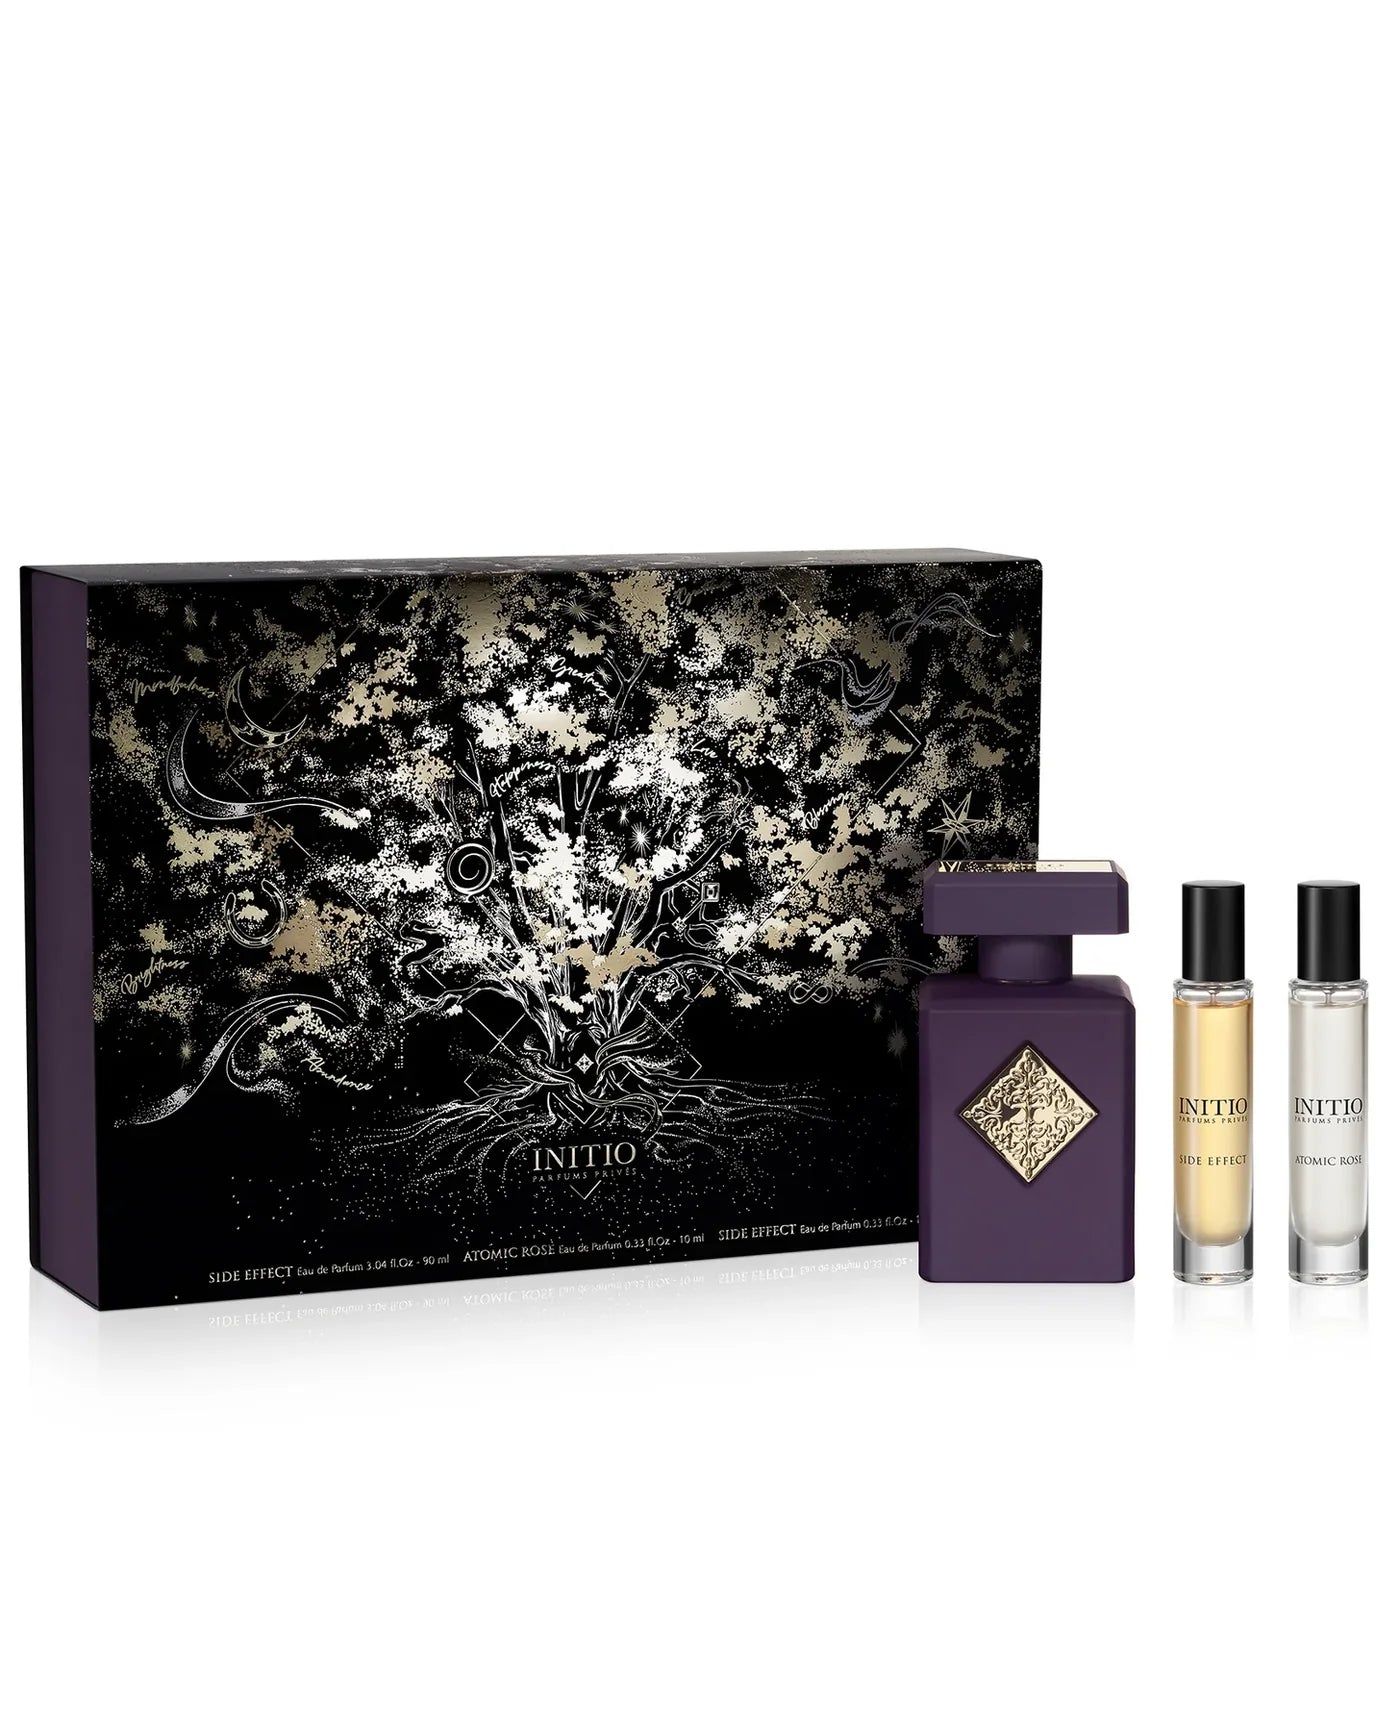 Initio Side Effect Limited Edition Set